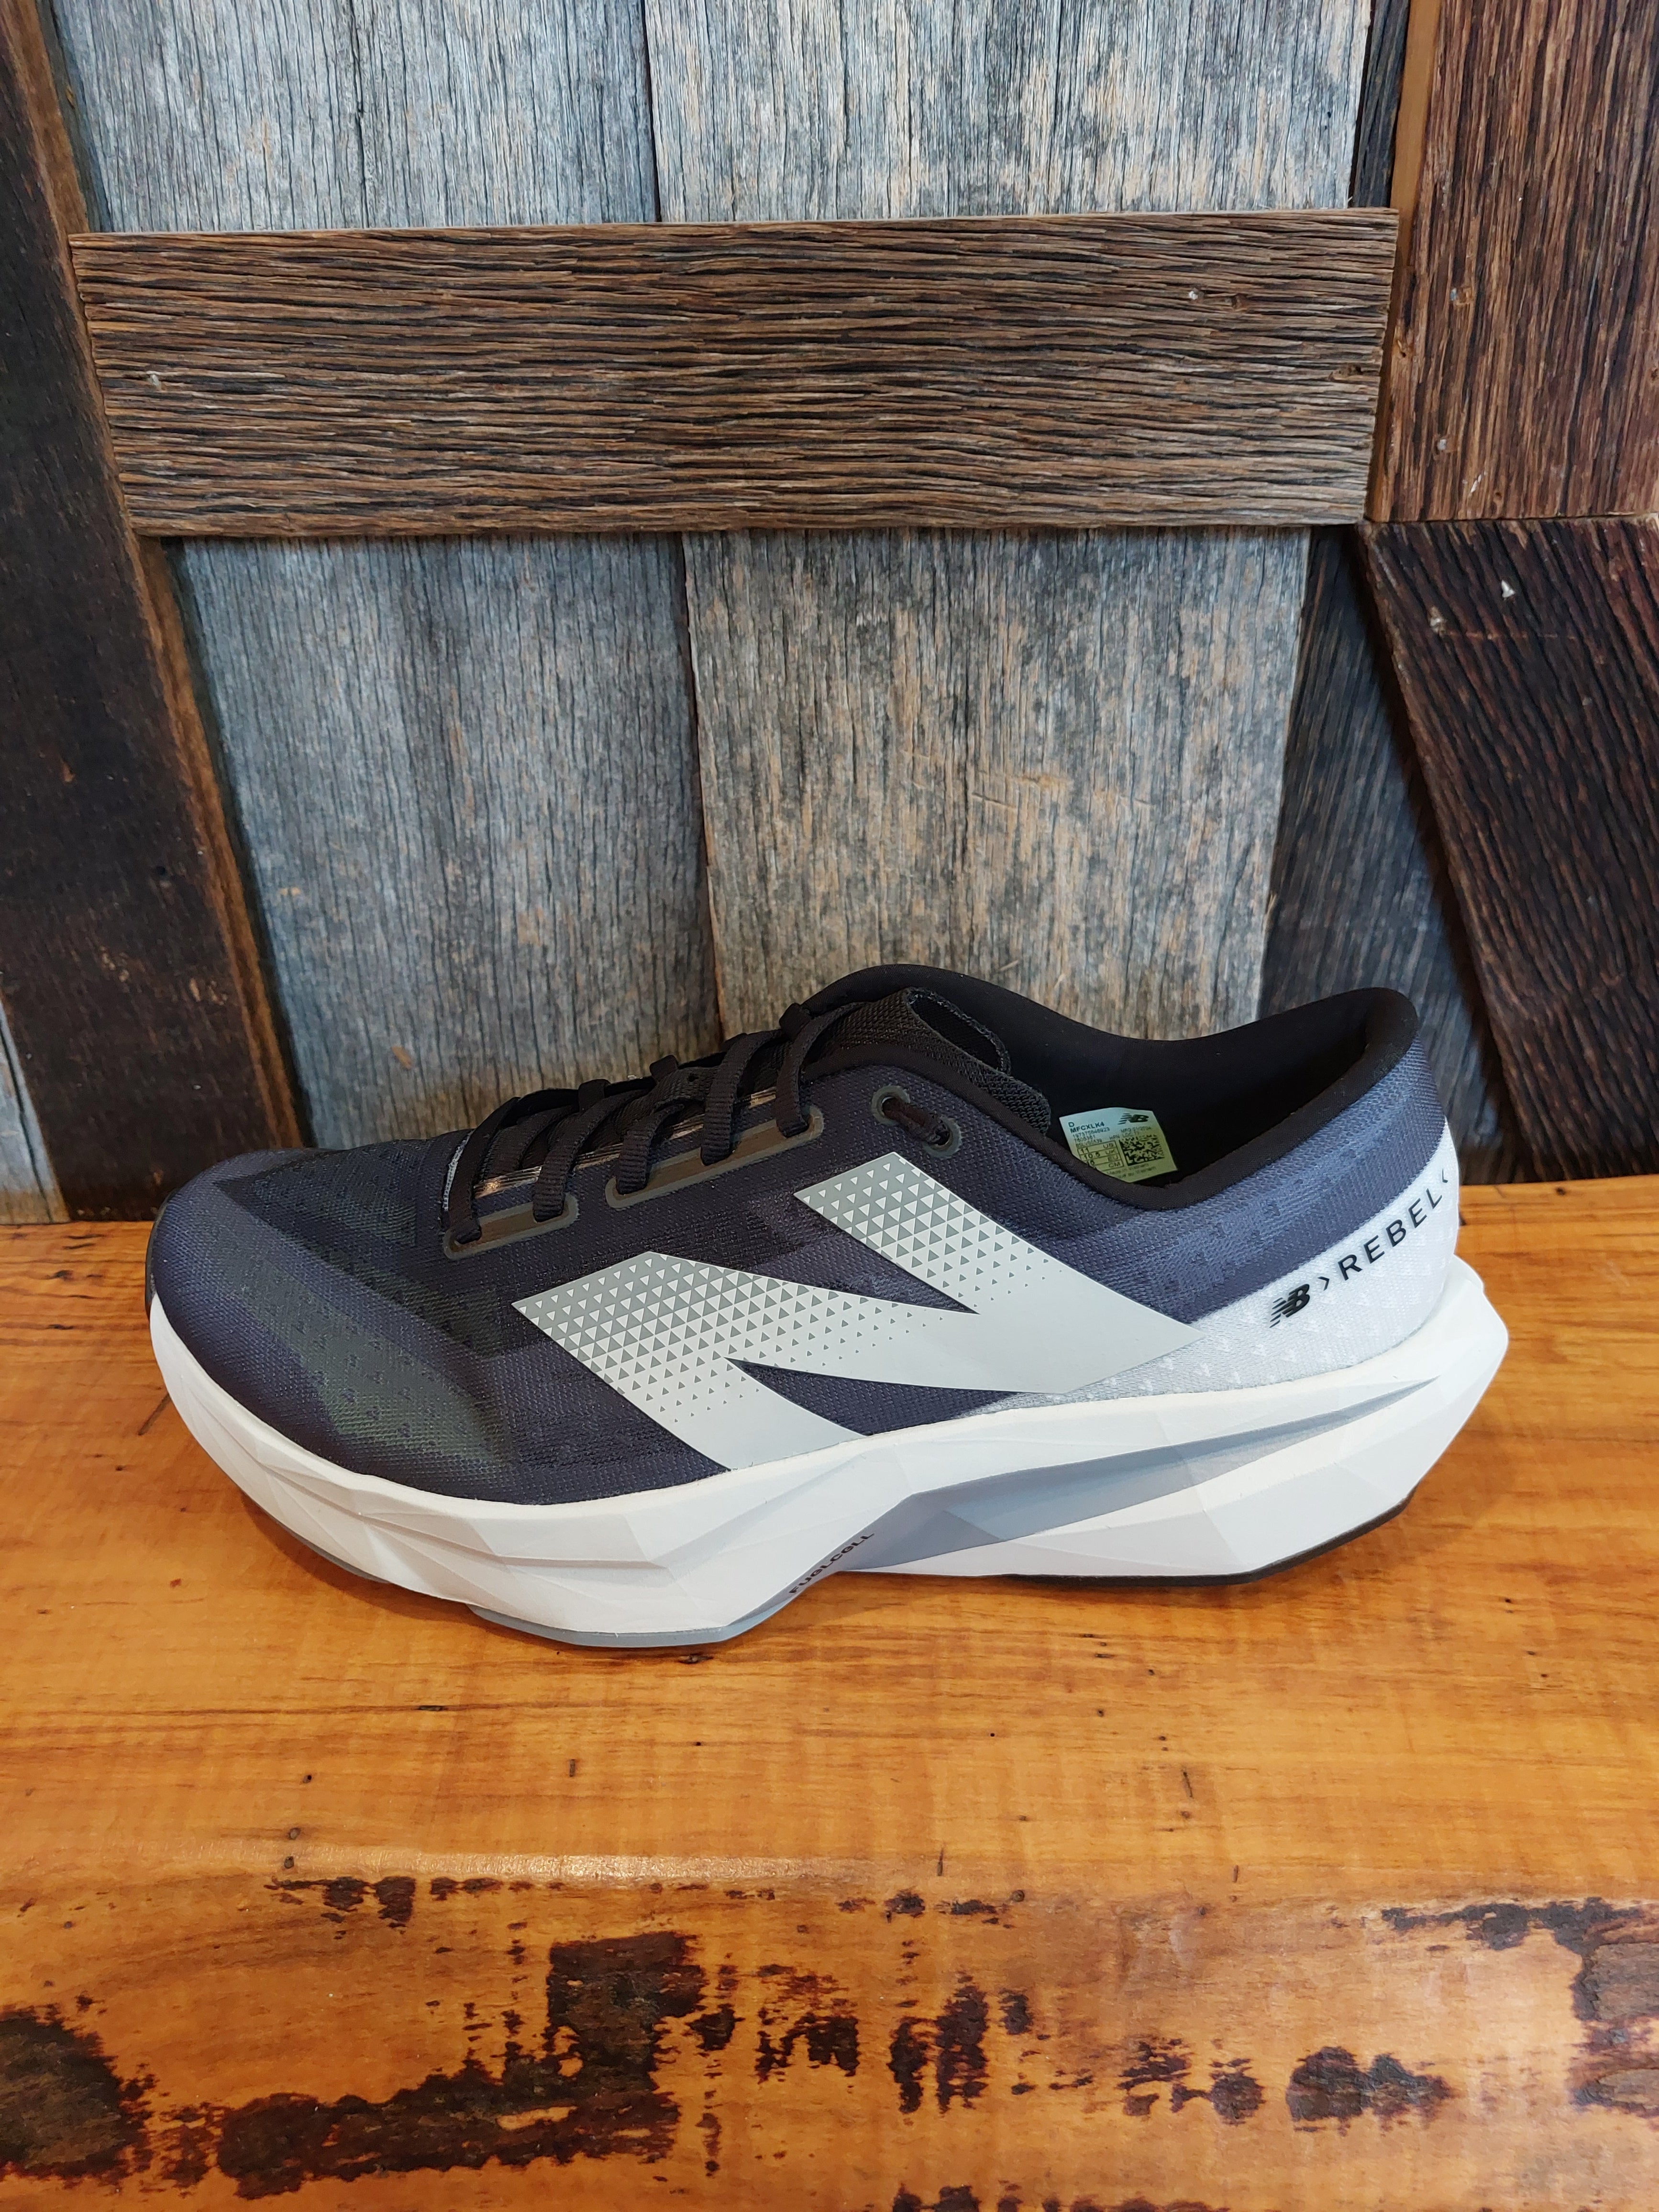 M New Balance FuelCell Rebel v4